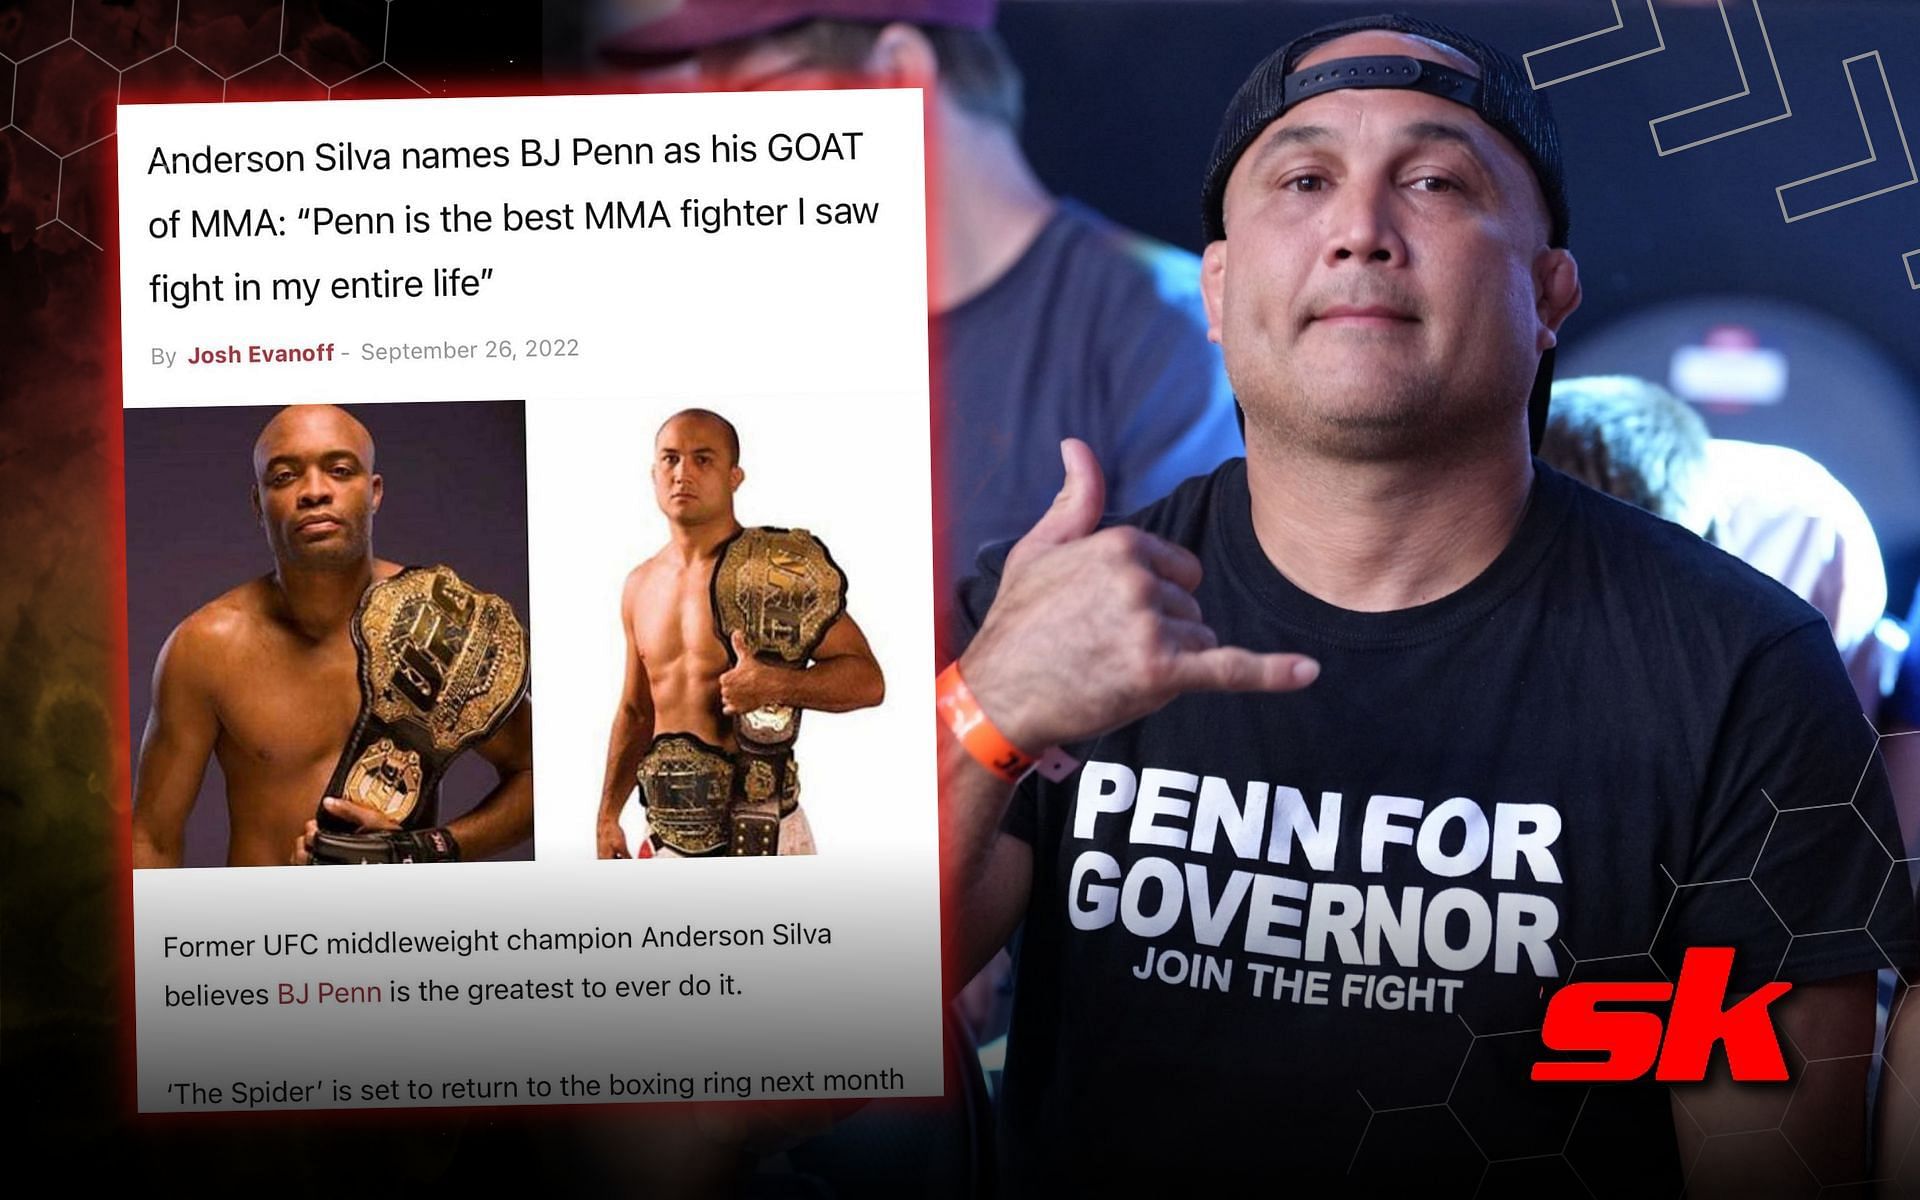 B.J. Penn humbled by Anderson Silva calling him the G.O.A.T. [Image credits: @BjPenn on Instagram; Getty Images.]